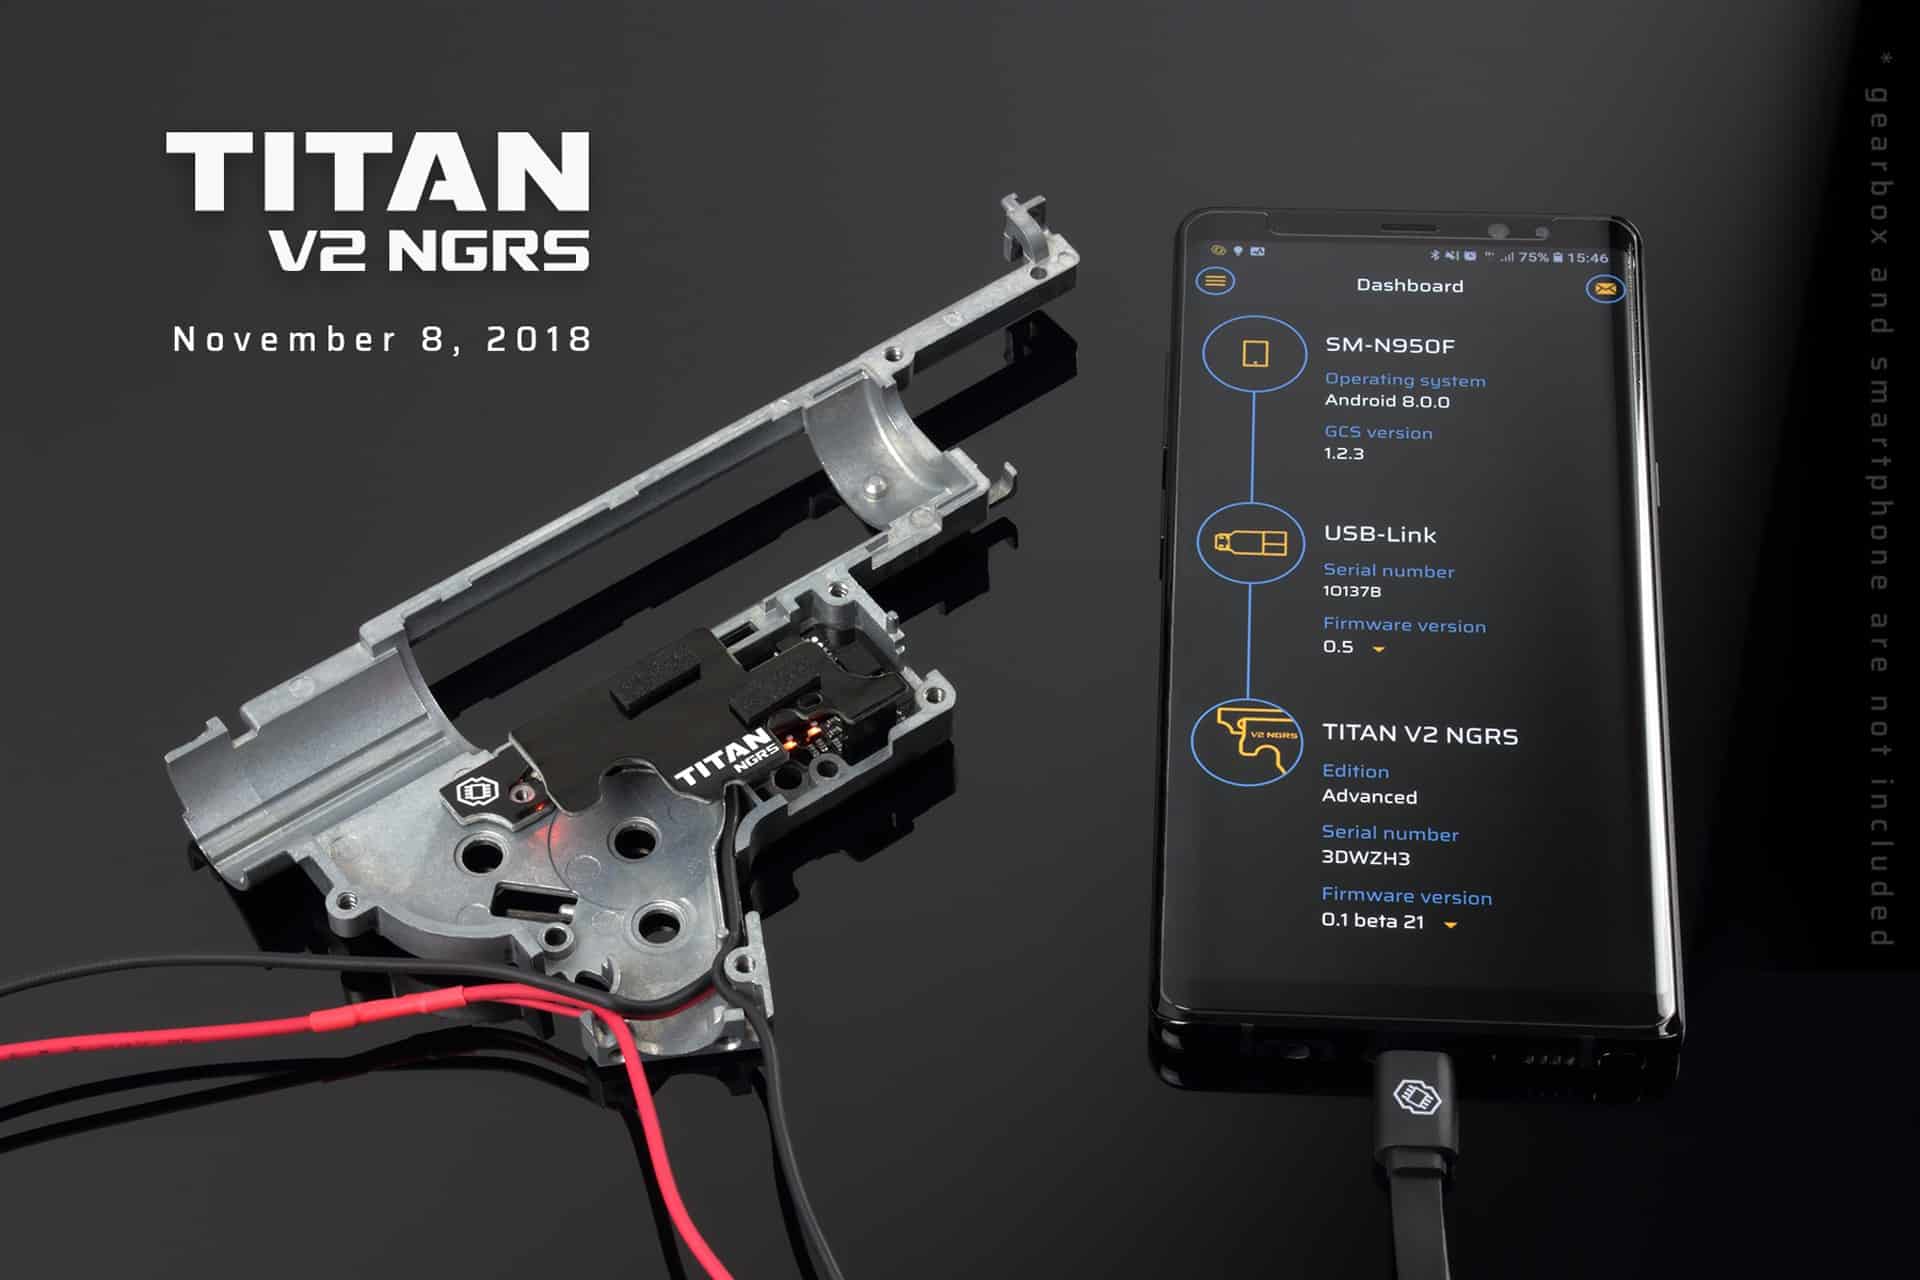 Gate Titan Mosfet V2 NGRS next gen recoil front wired - Basic